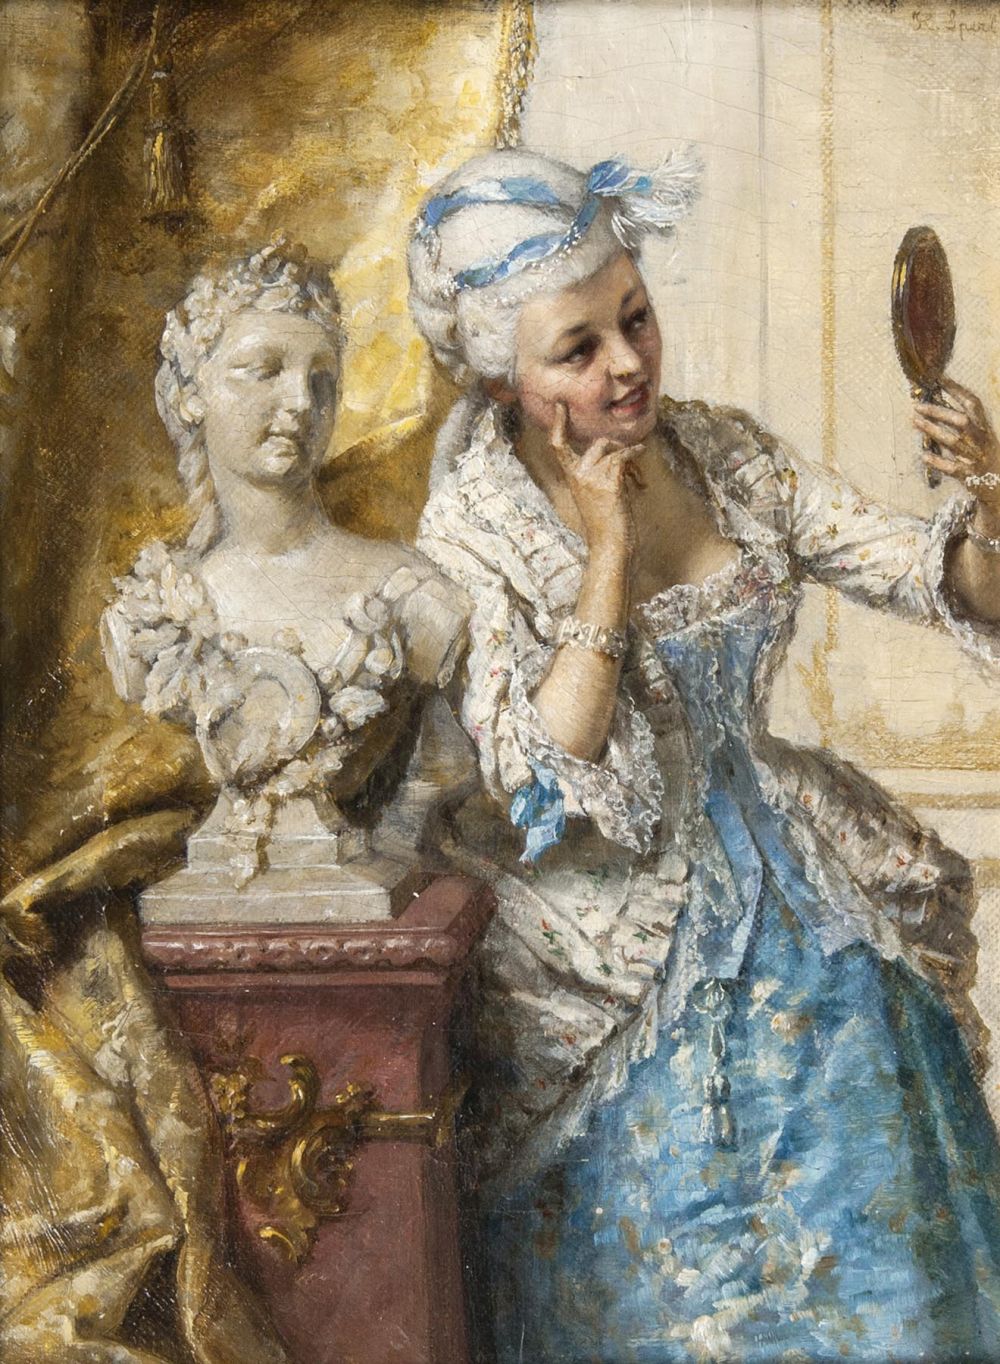 Lady with Mirror